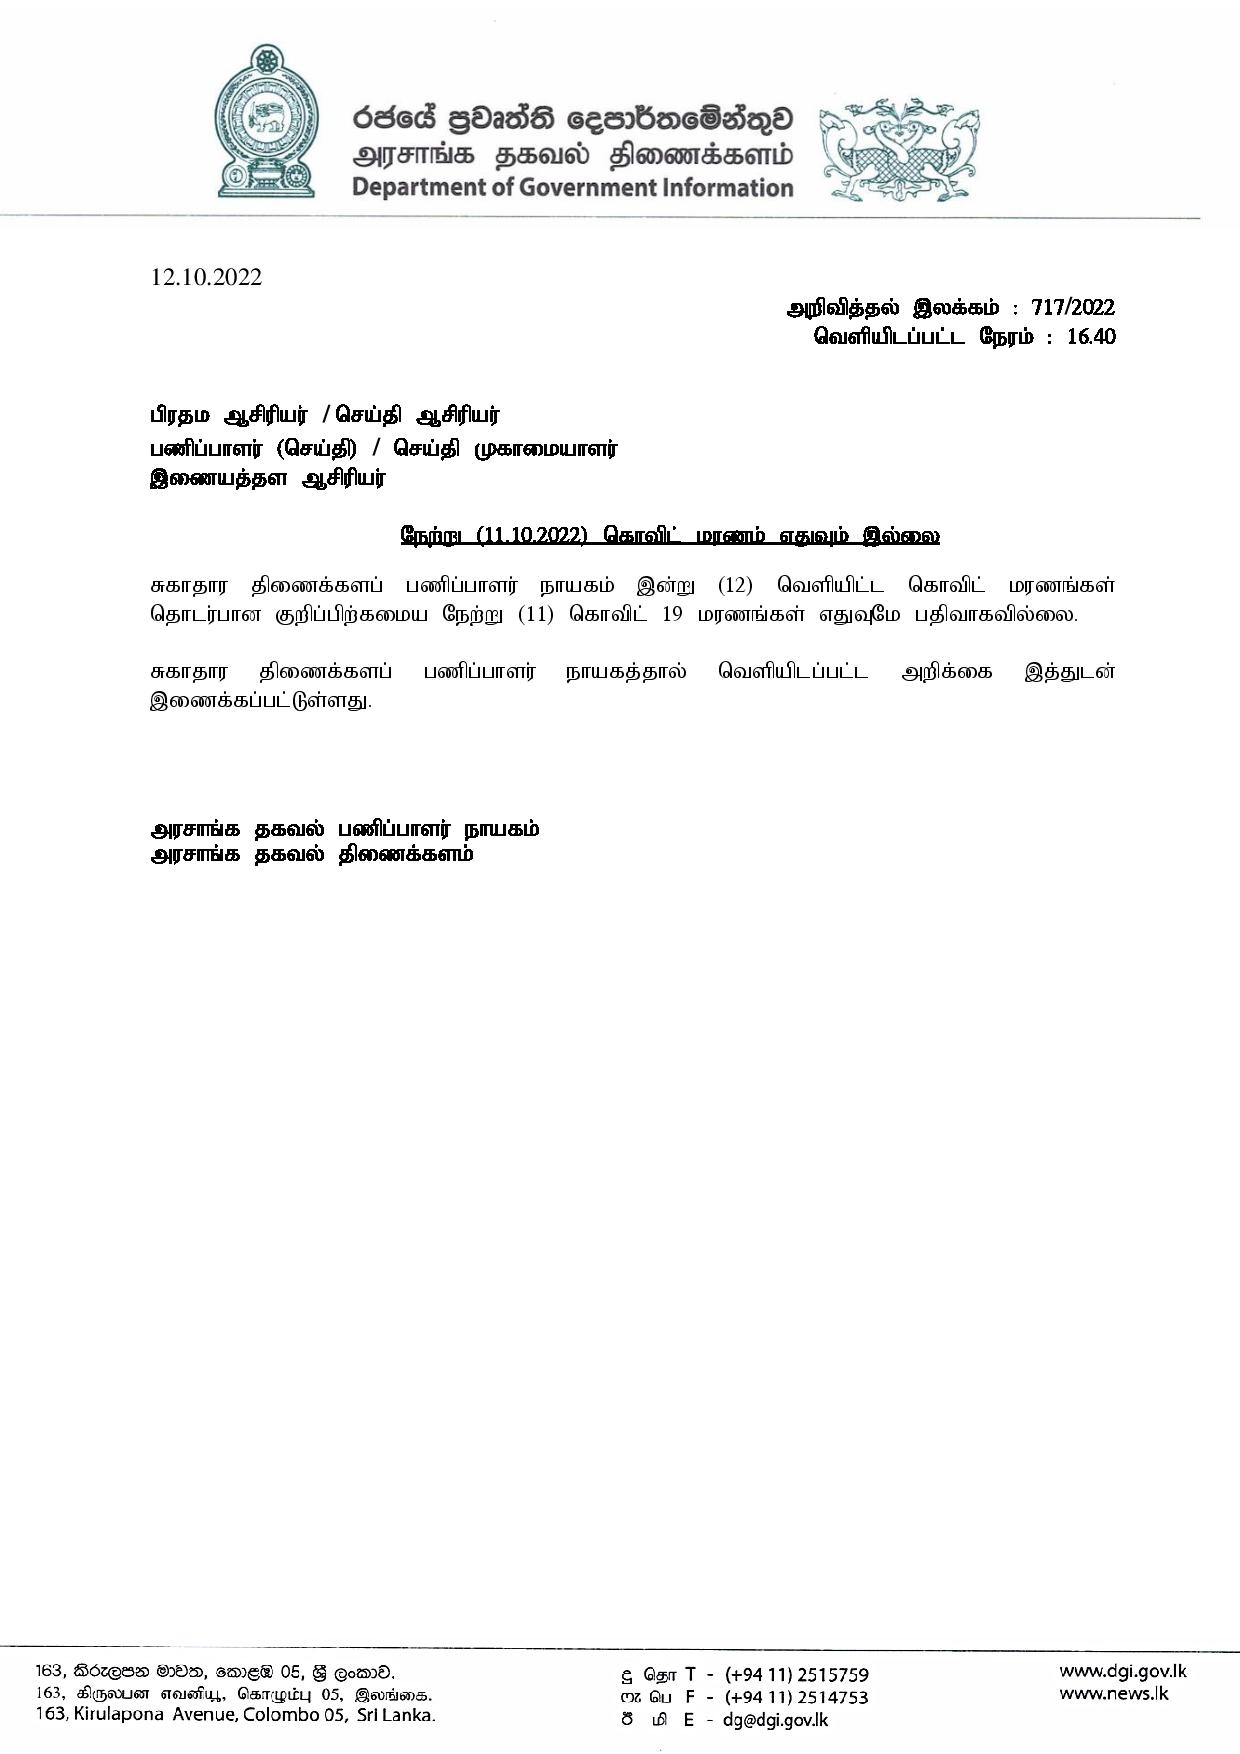 Release No 717 Tamil page 001